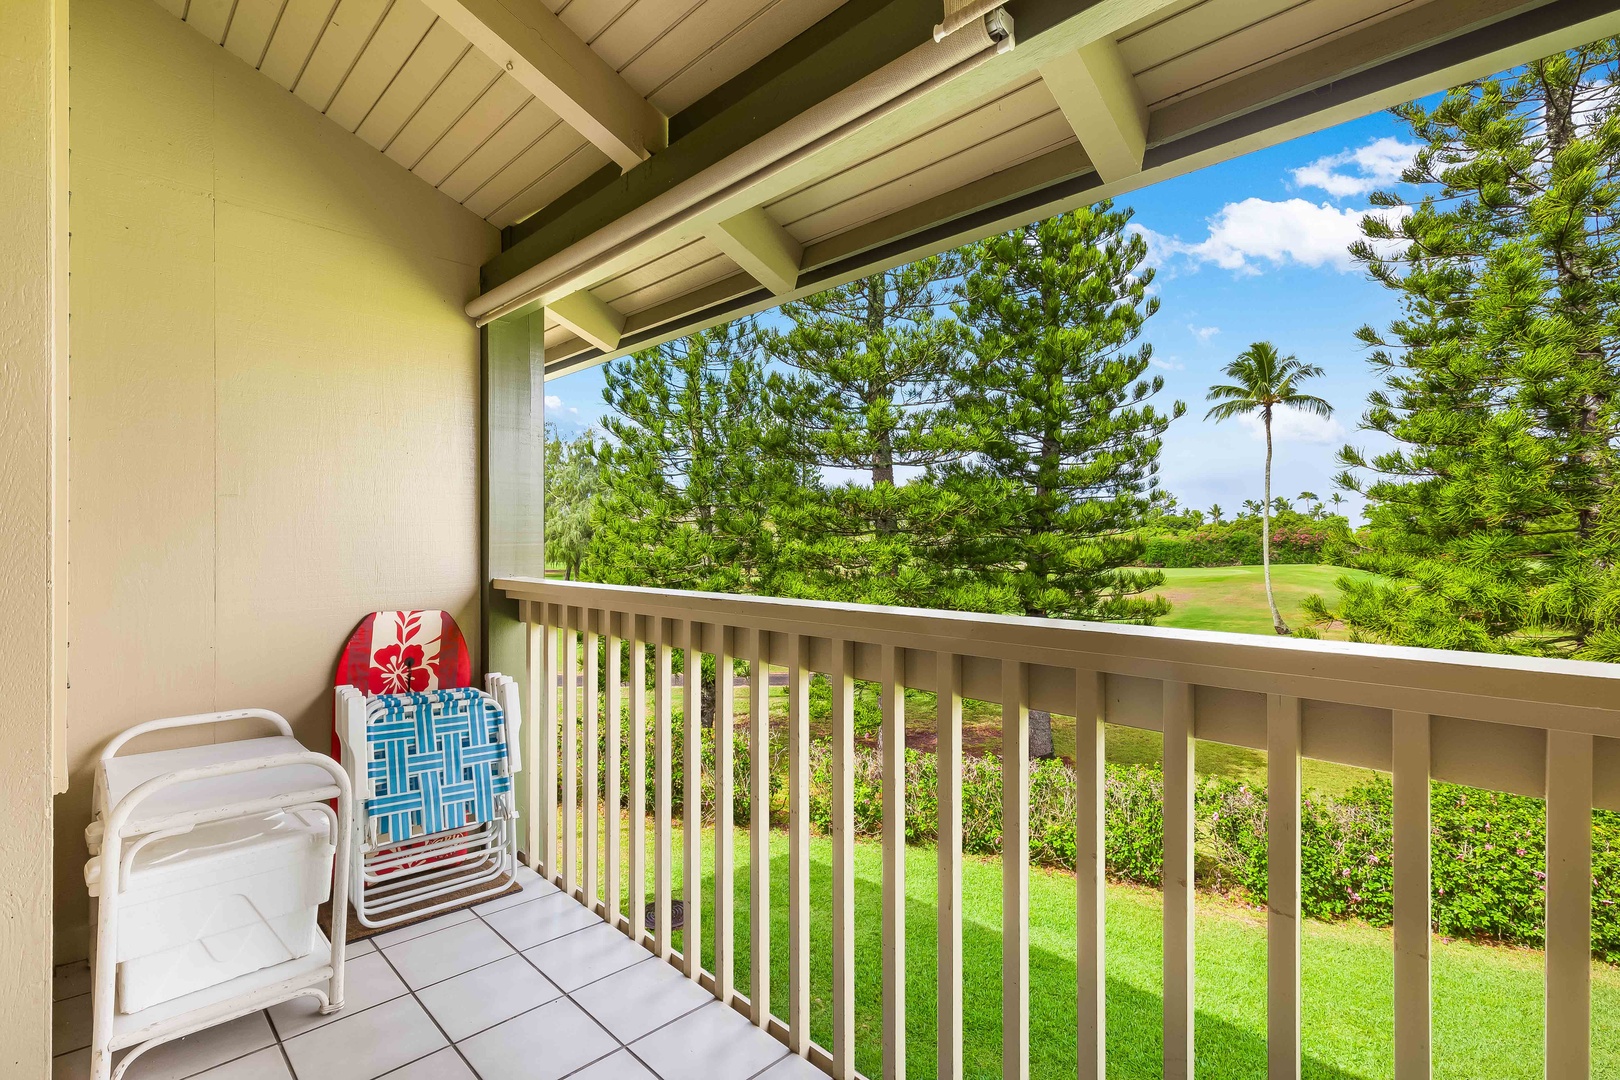 Kahuku Vacation Rentals, Ilima West Kuilima Estates #18 at Turtle Bay - Enjoy the beach chairs & equipment provided for your use.